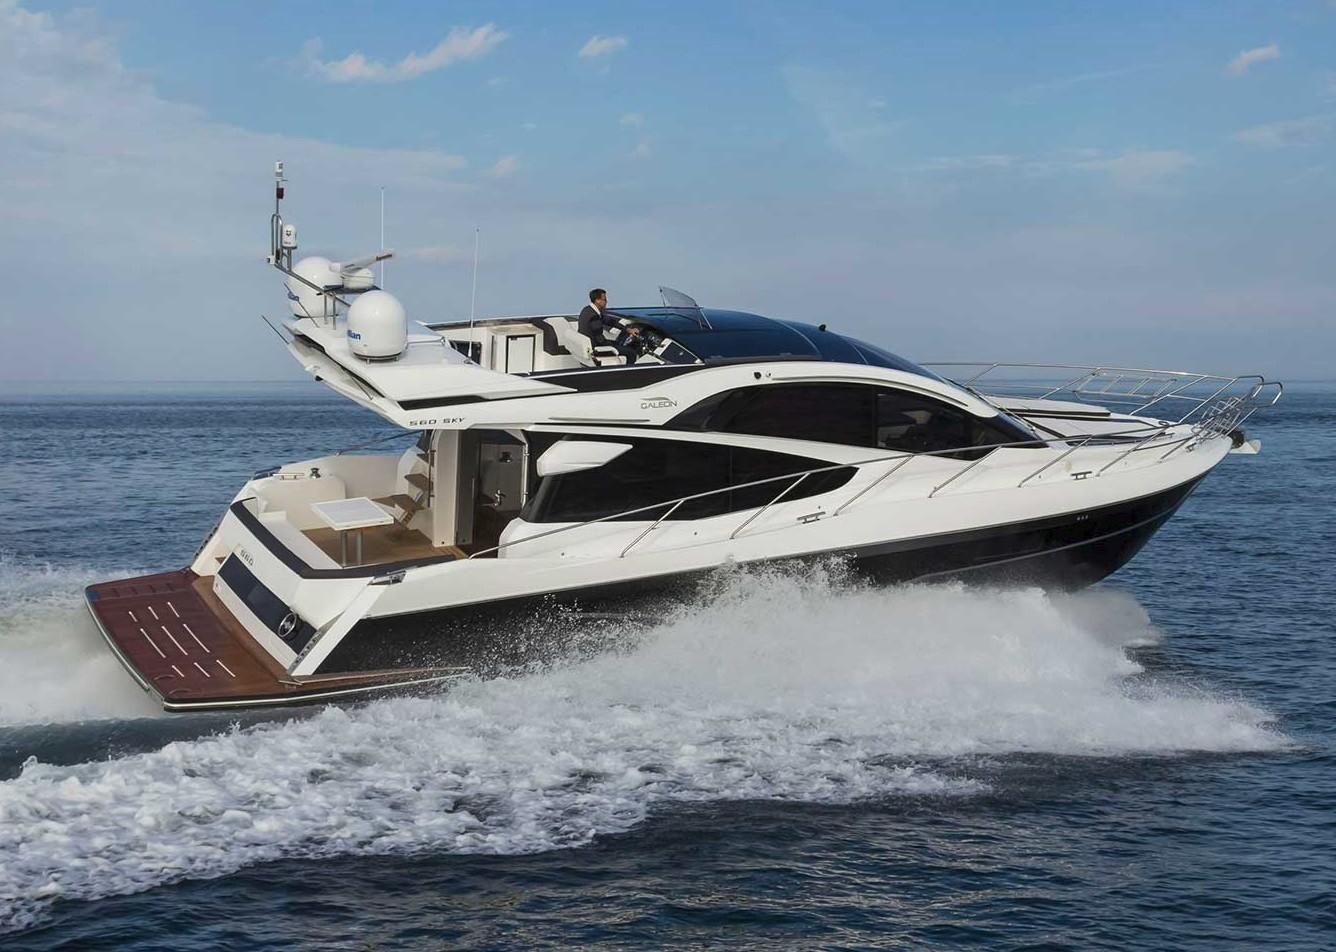 galeon yachts 560 skydeck